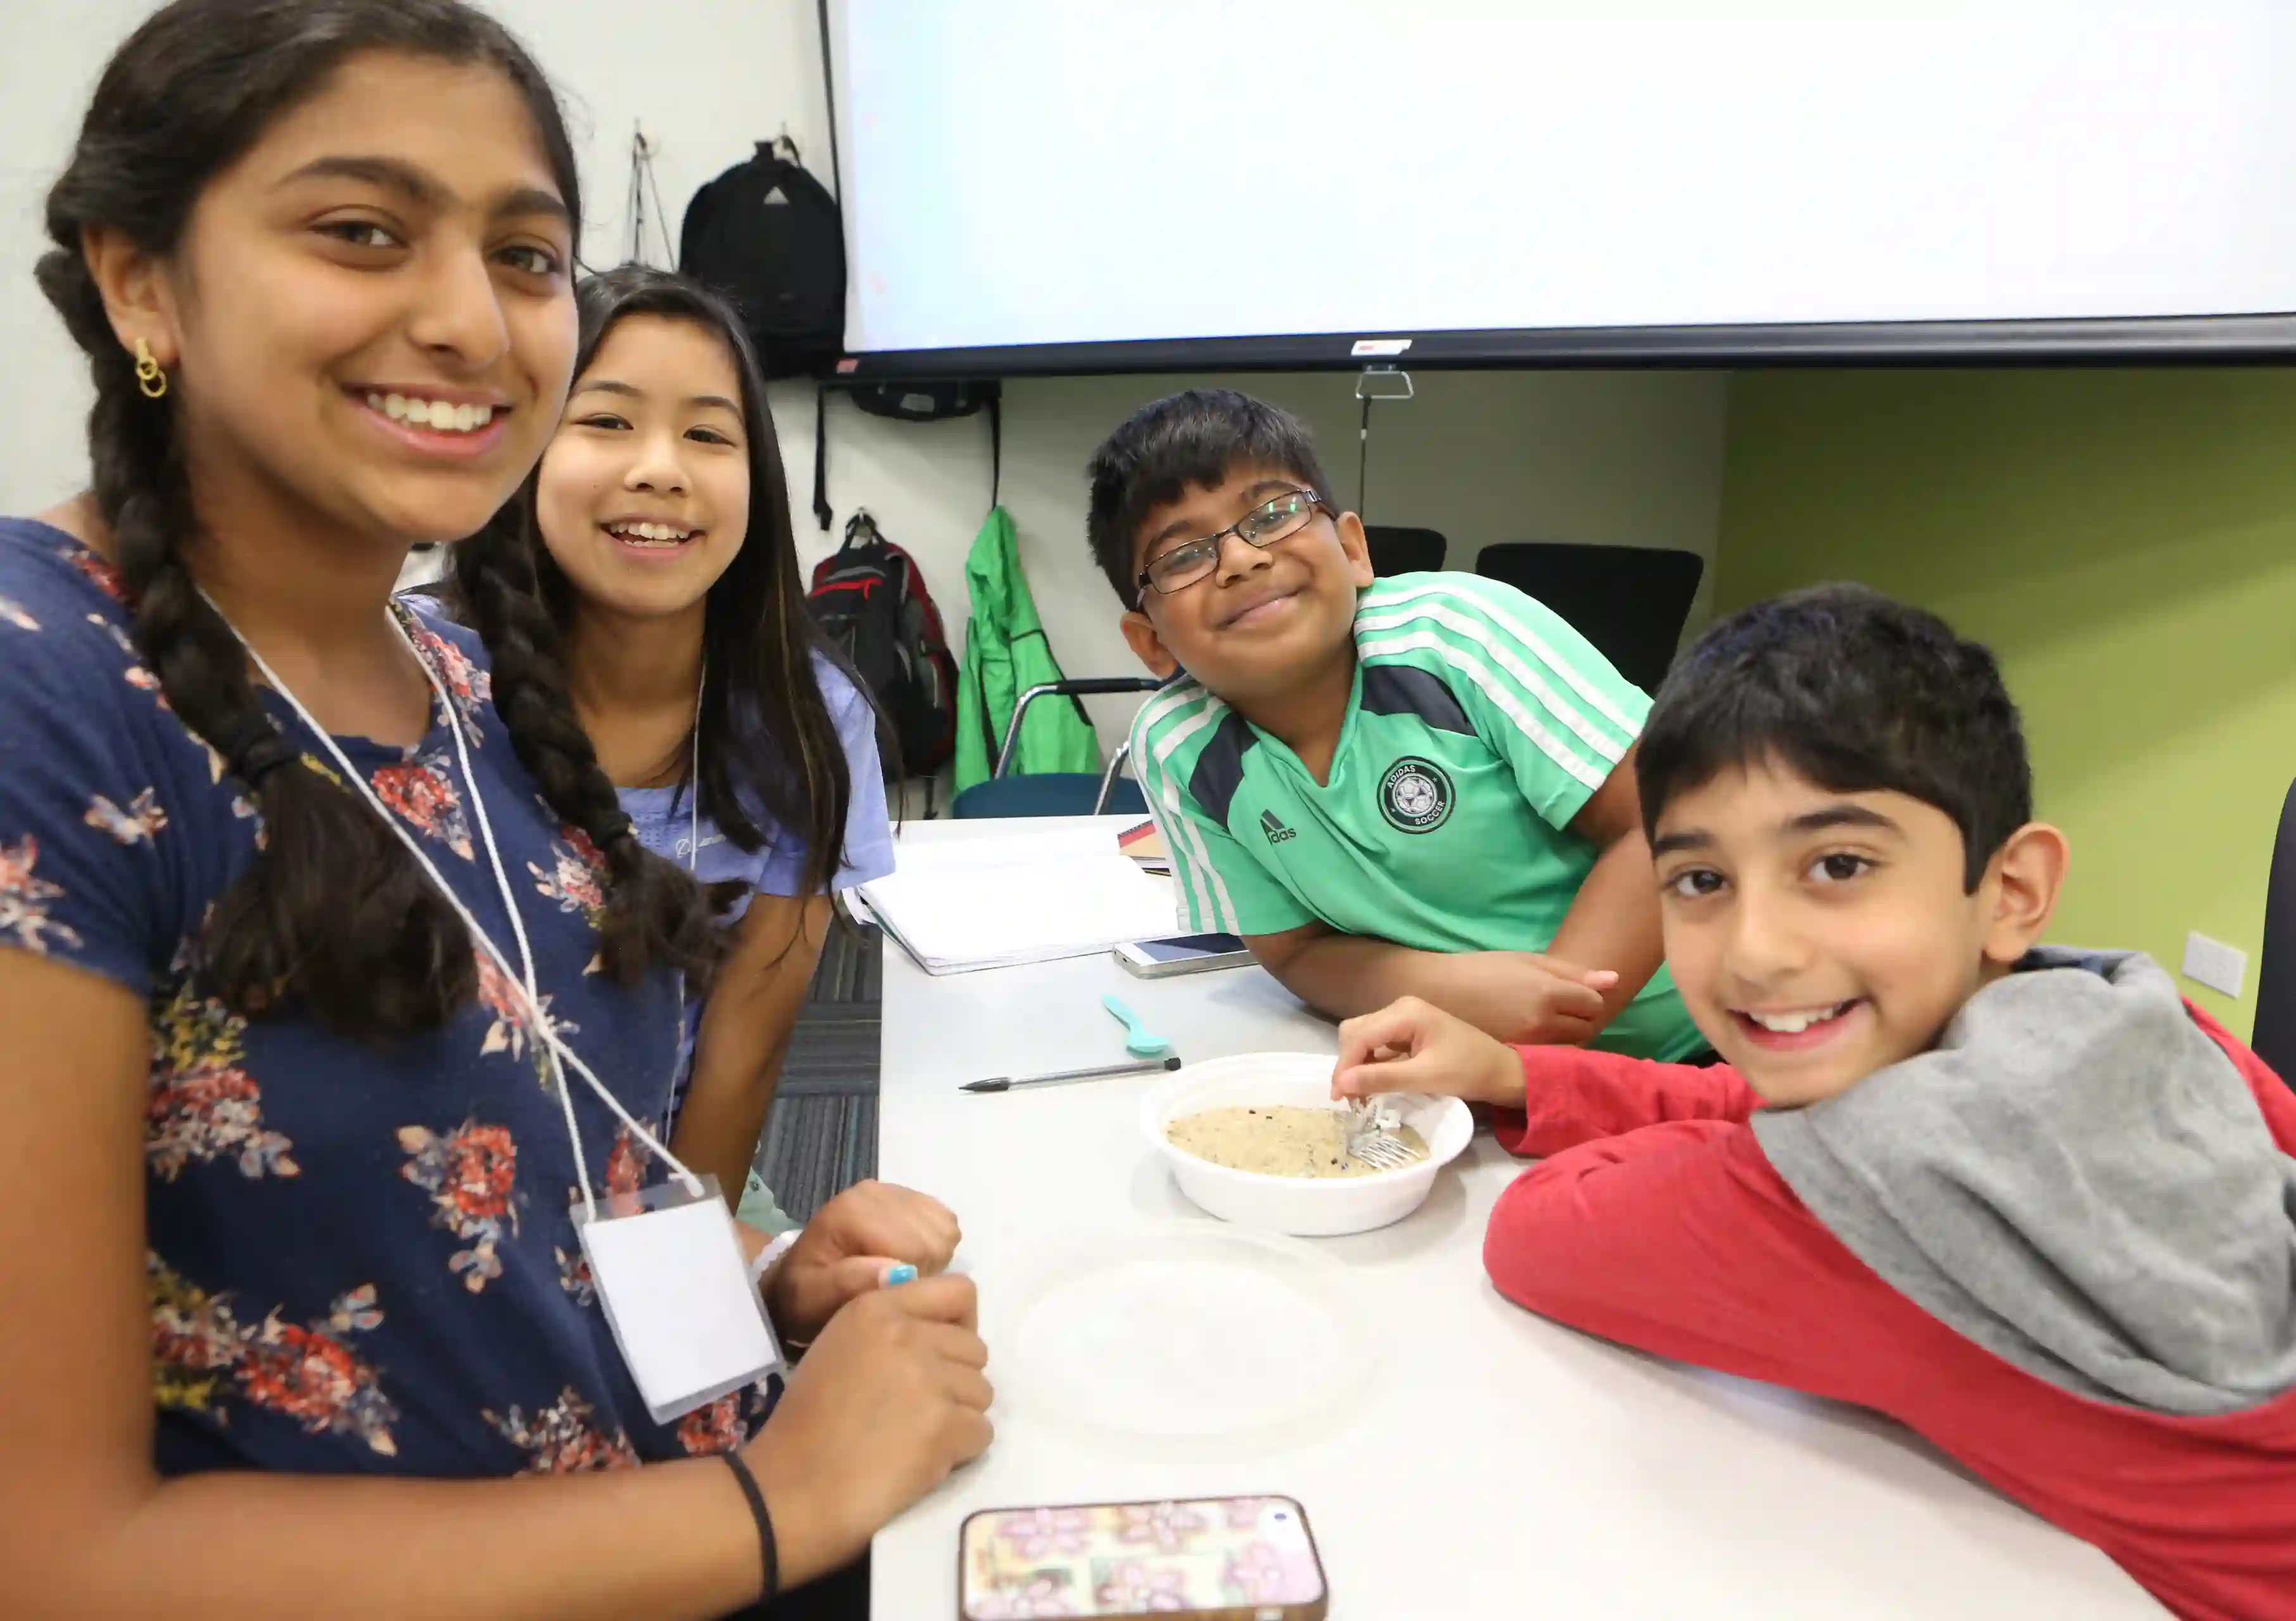 A group of kids smile at the camera during a STEAM youth camp.